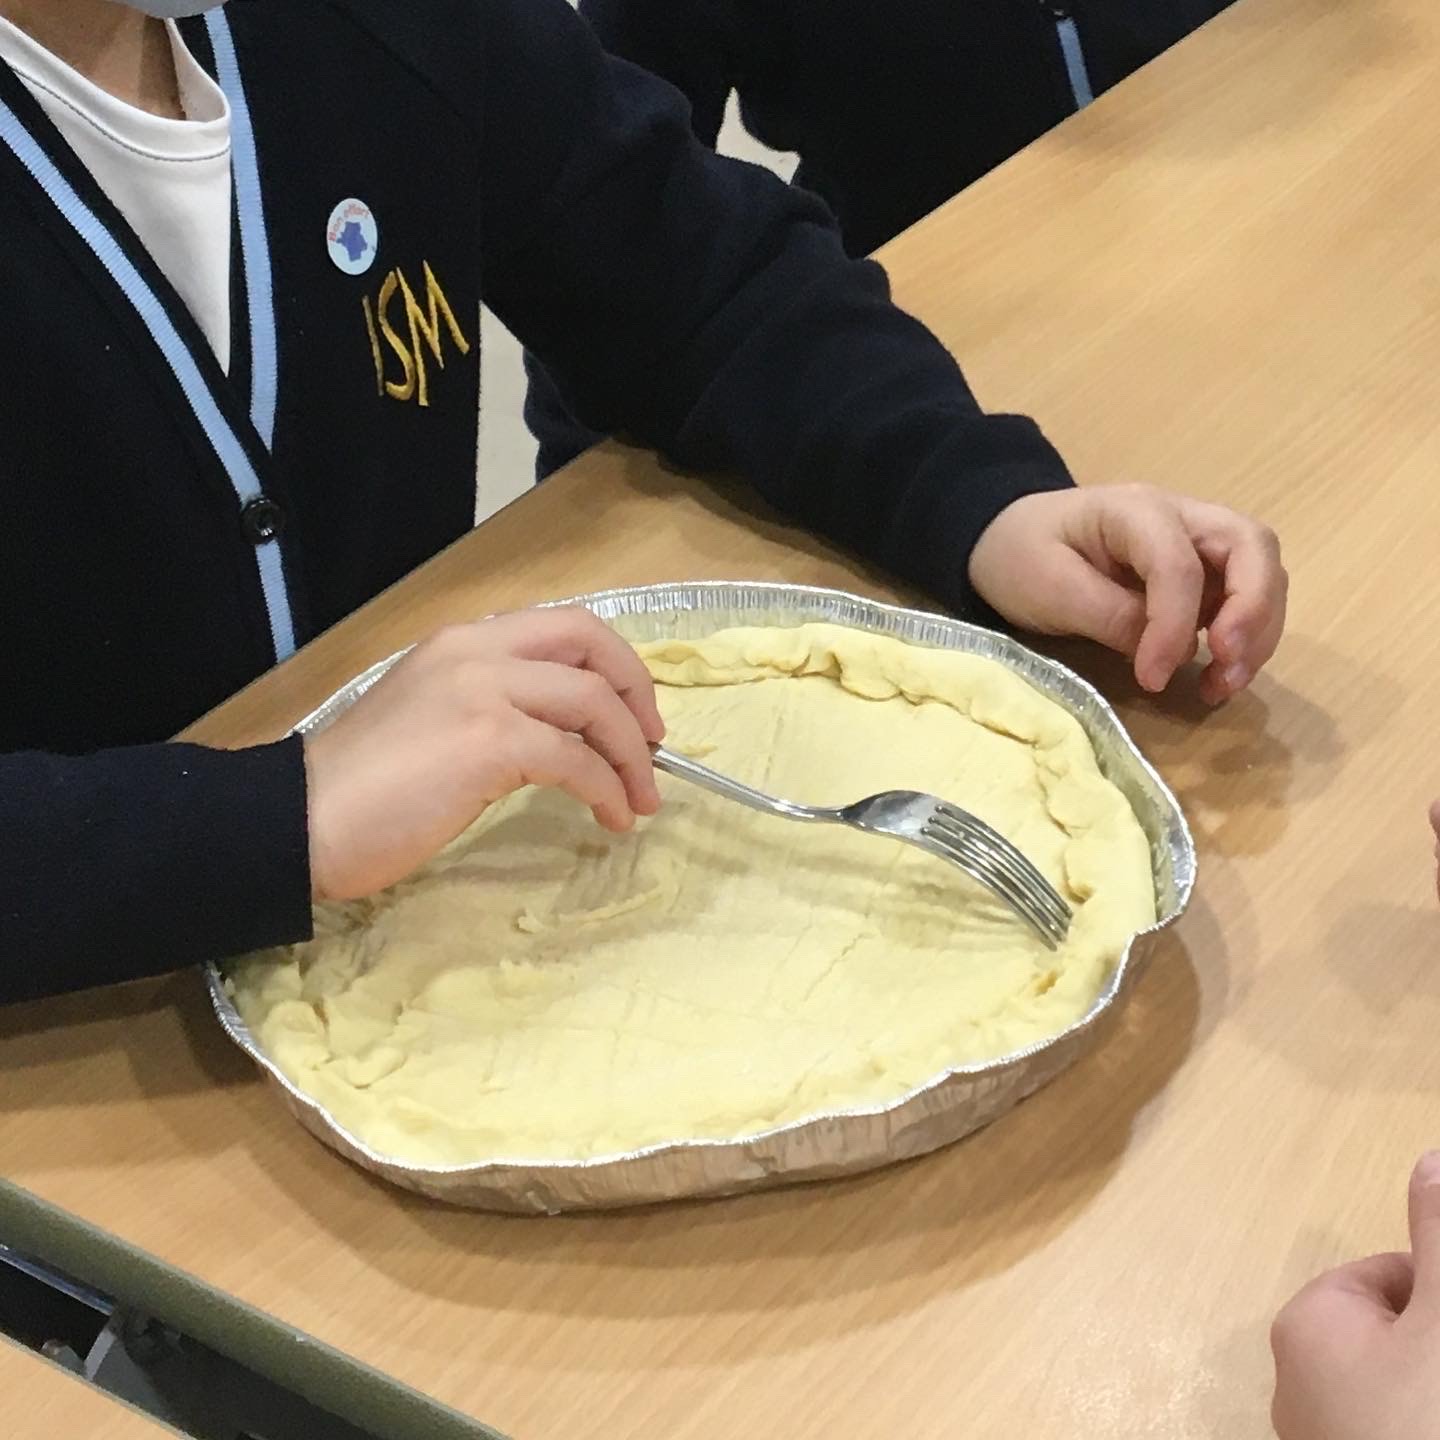 Early Years students create traditional 'galette des rois' Image